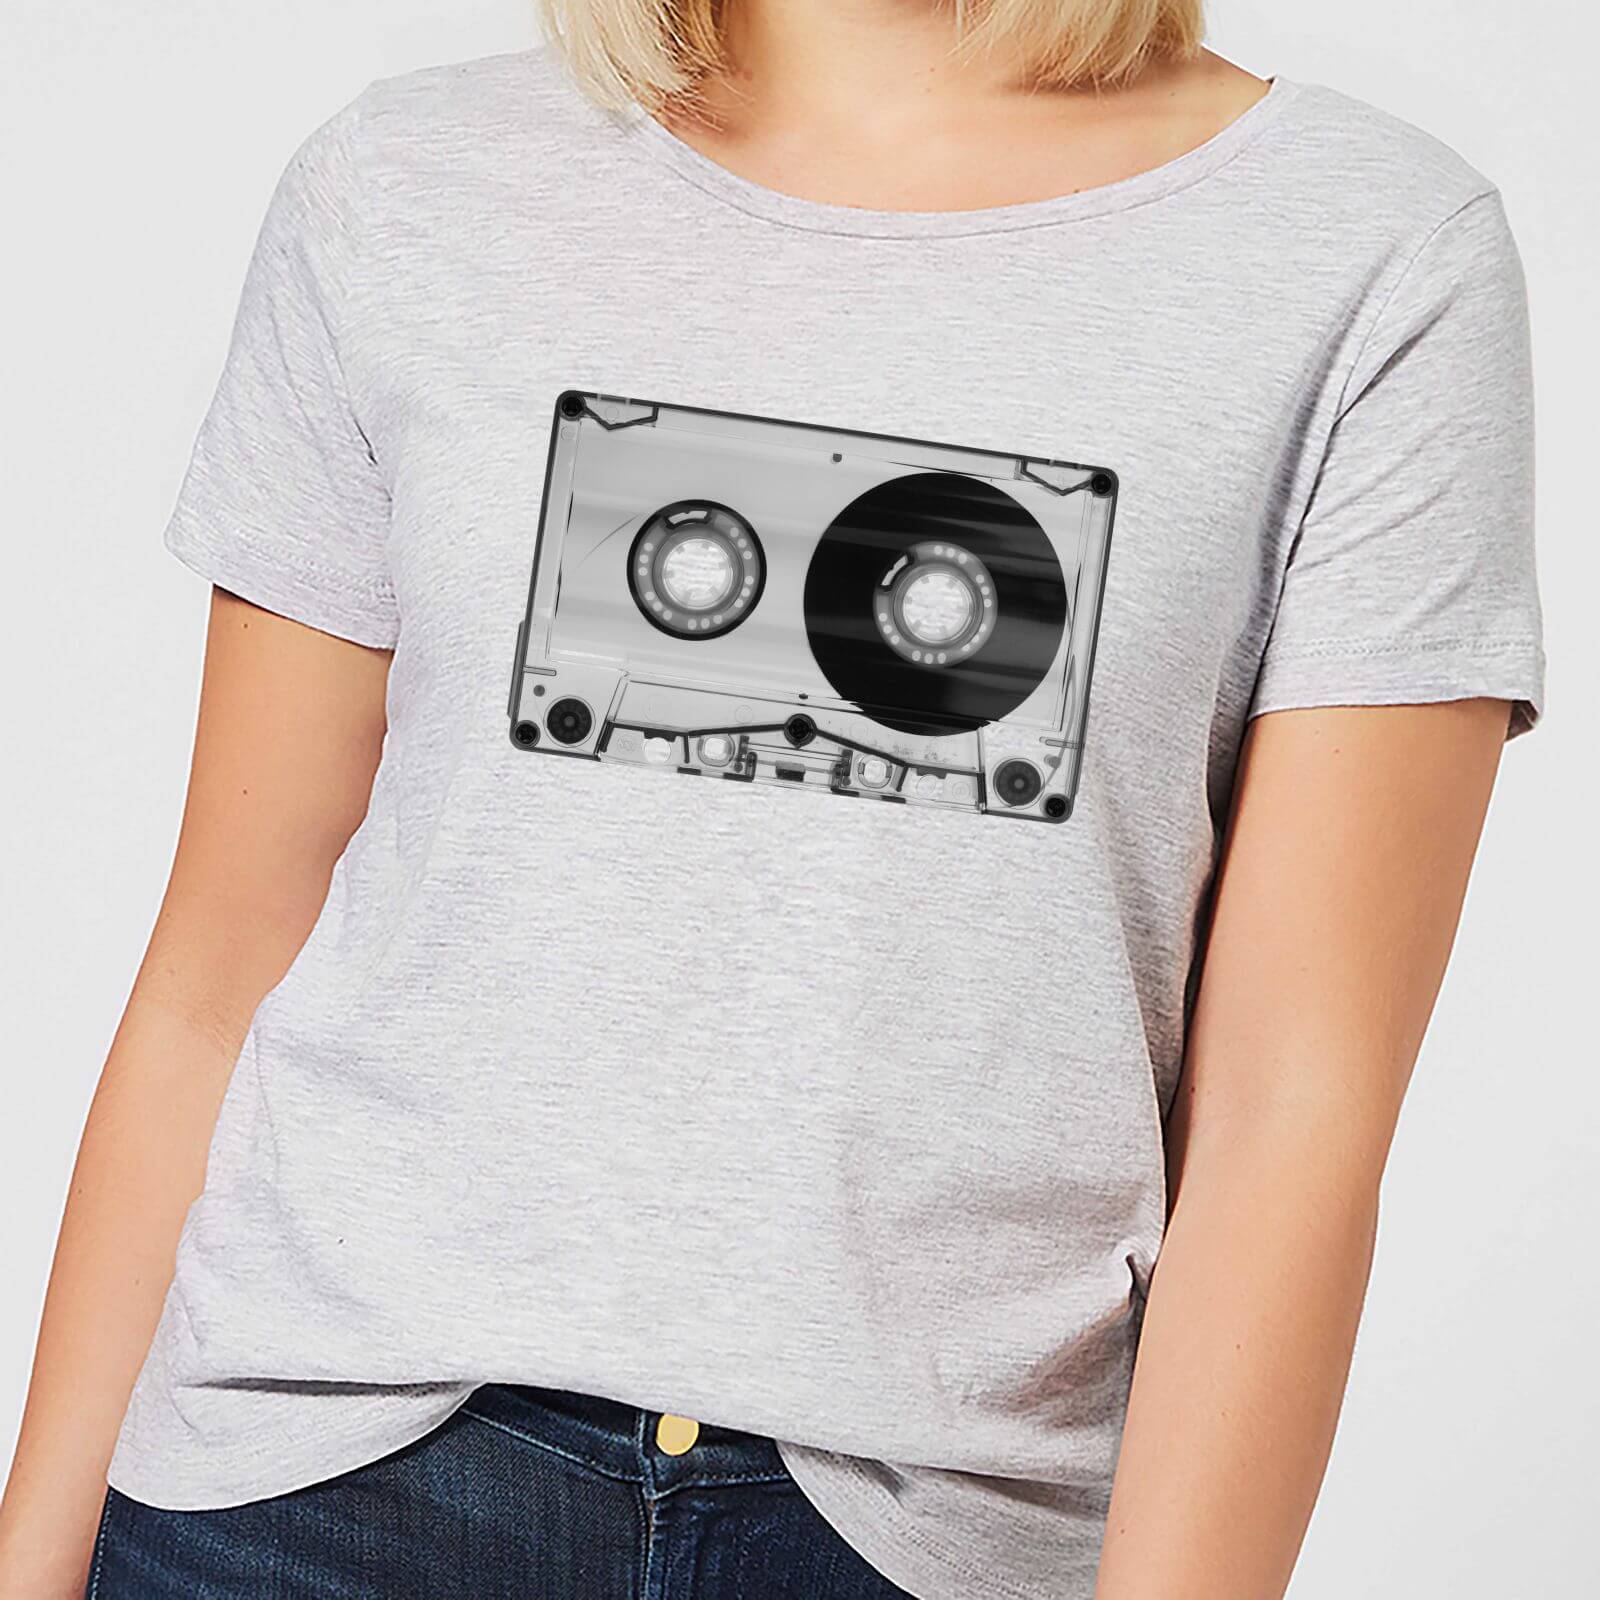 The Motivated Type Cassette Tape Women's T-Shirt - Grey - S - Grey